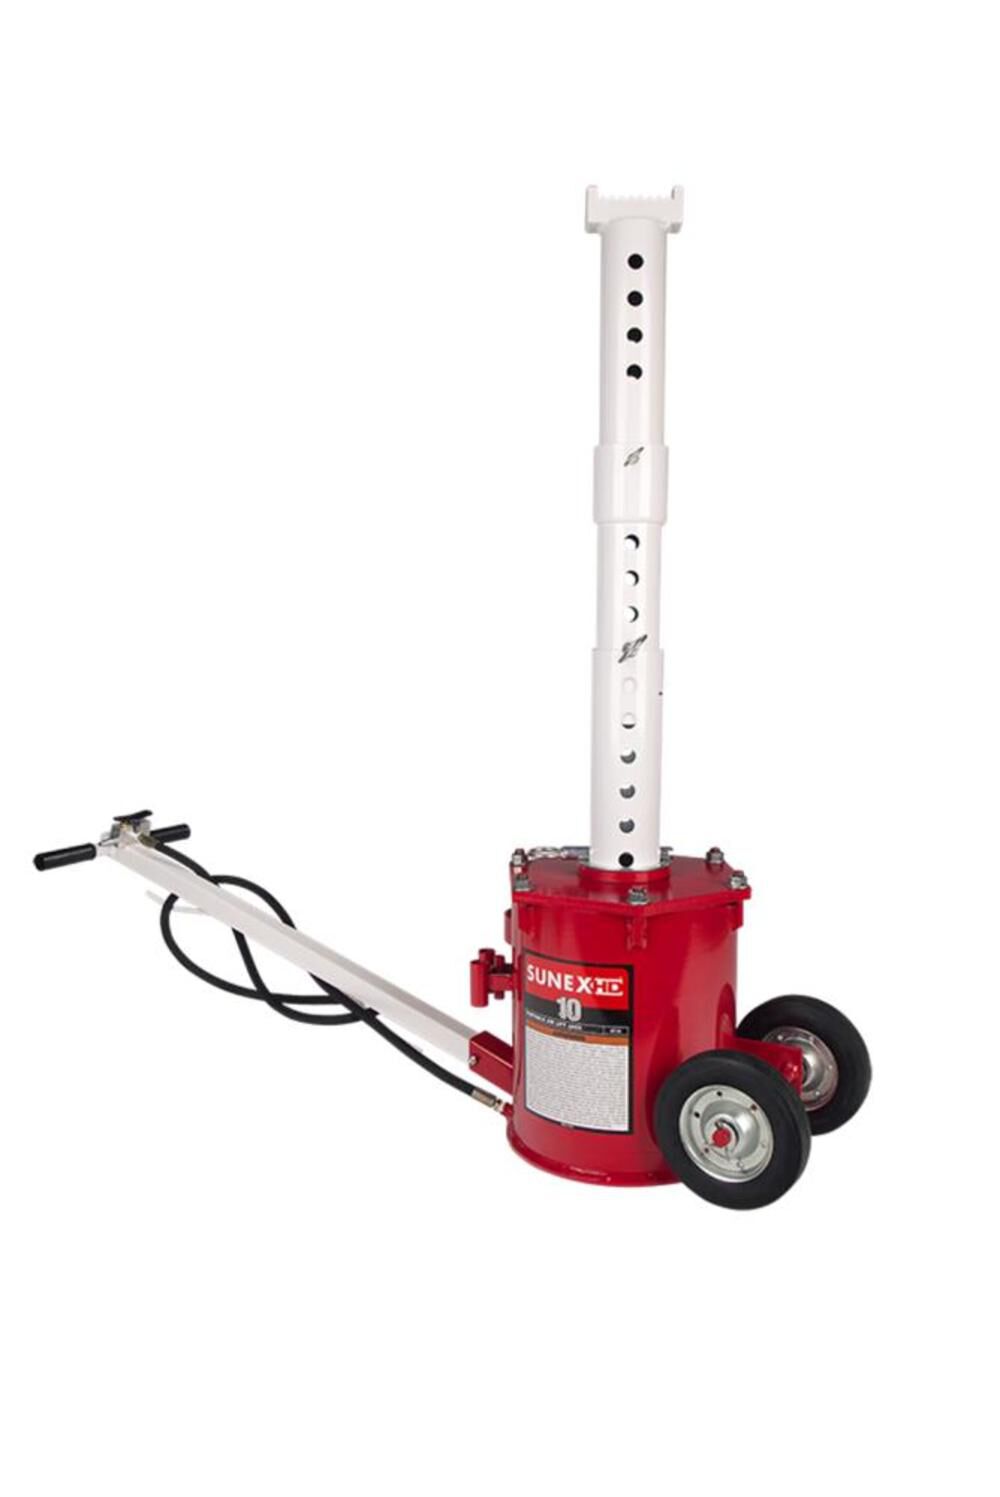 Norco 10 Ton Air Lift Jack for Sale